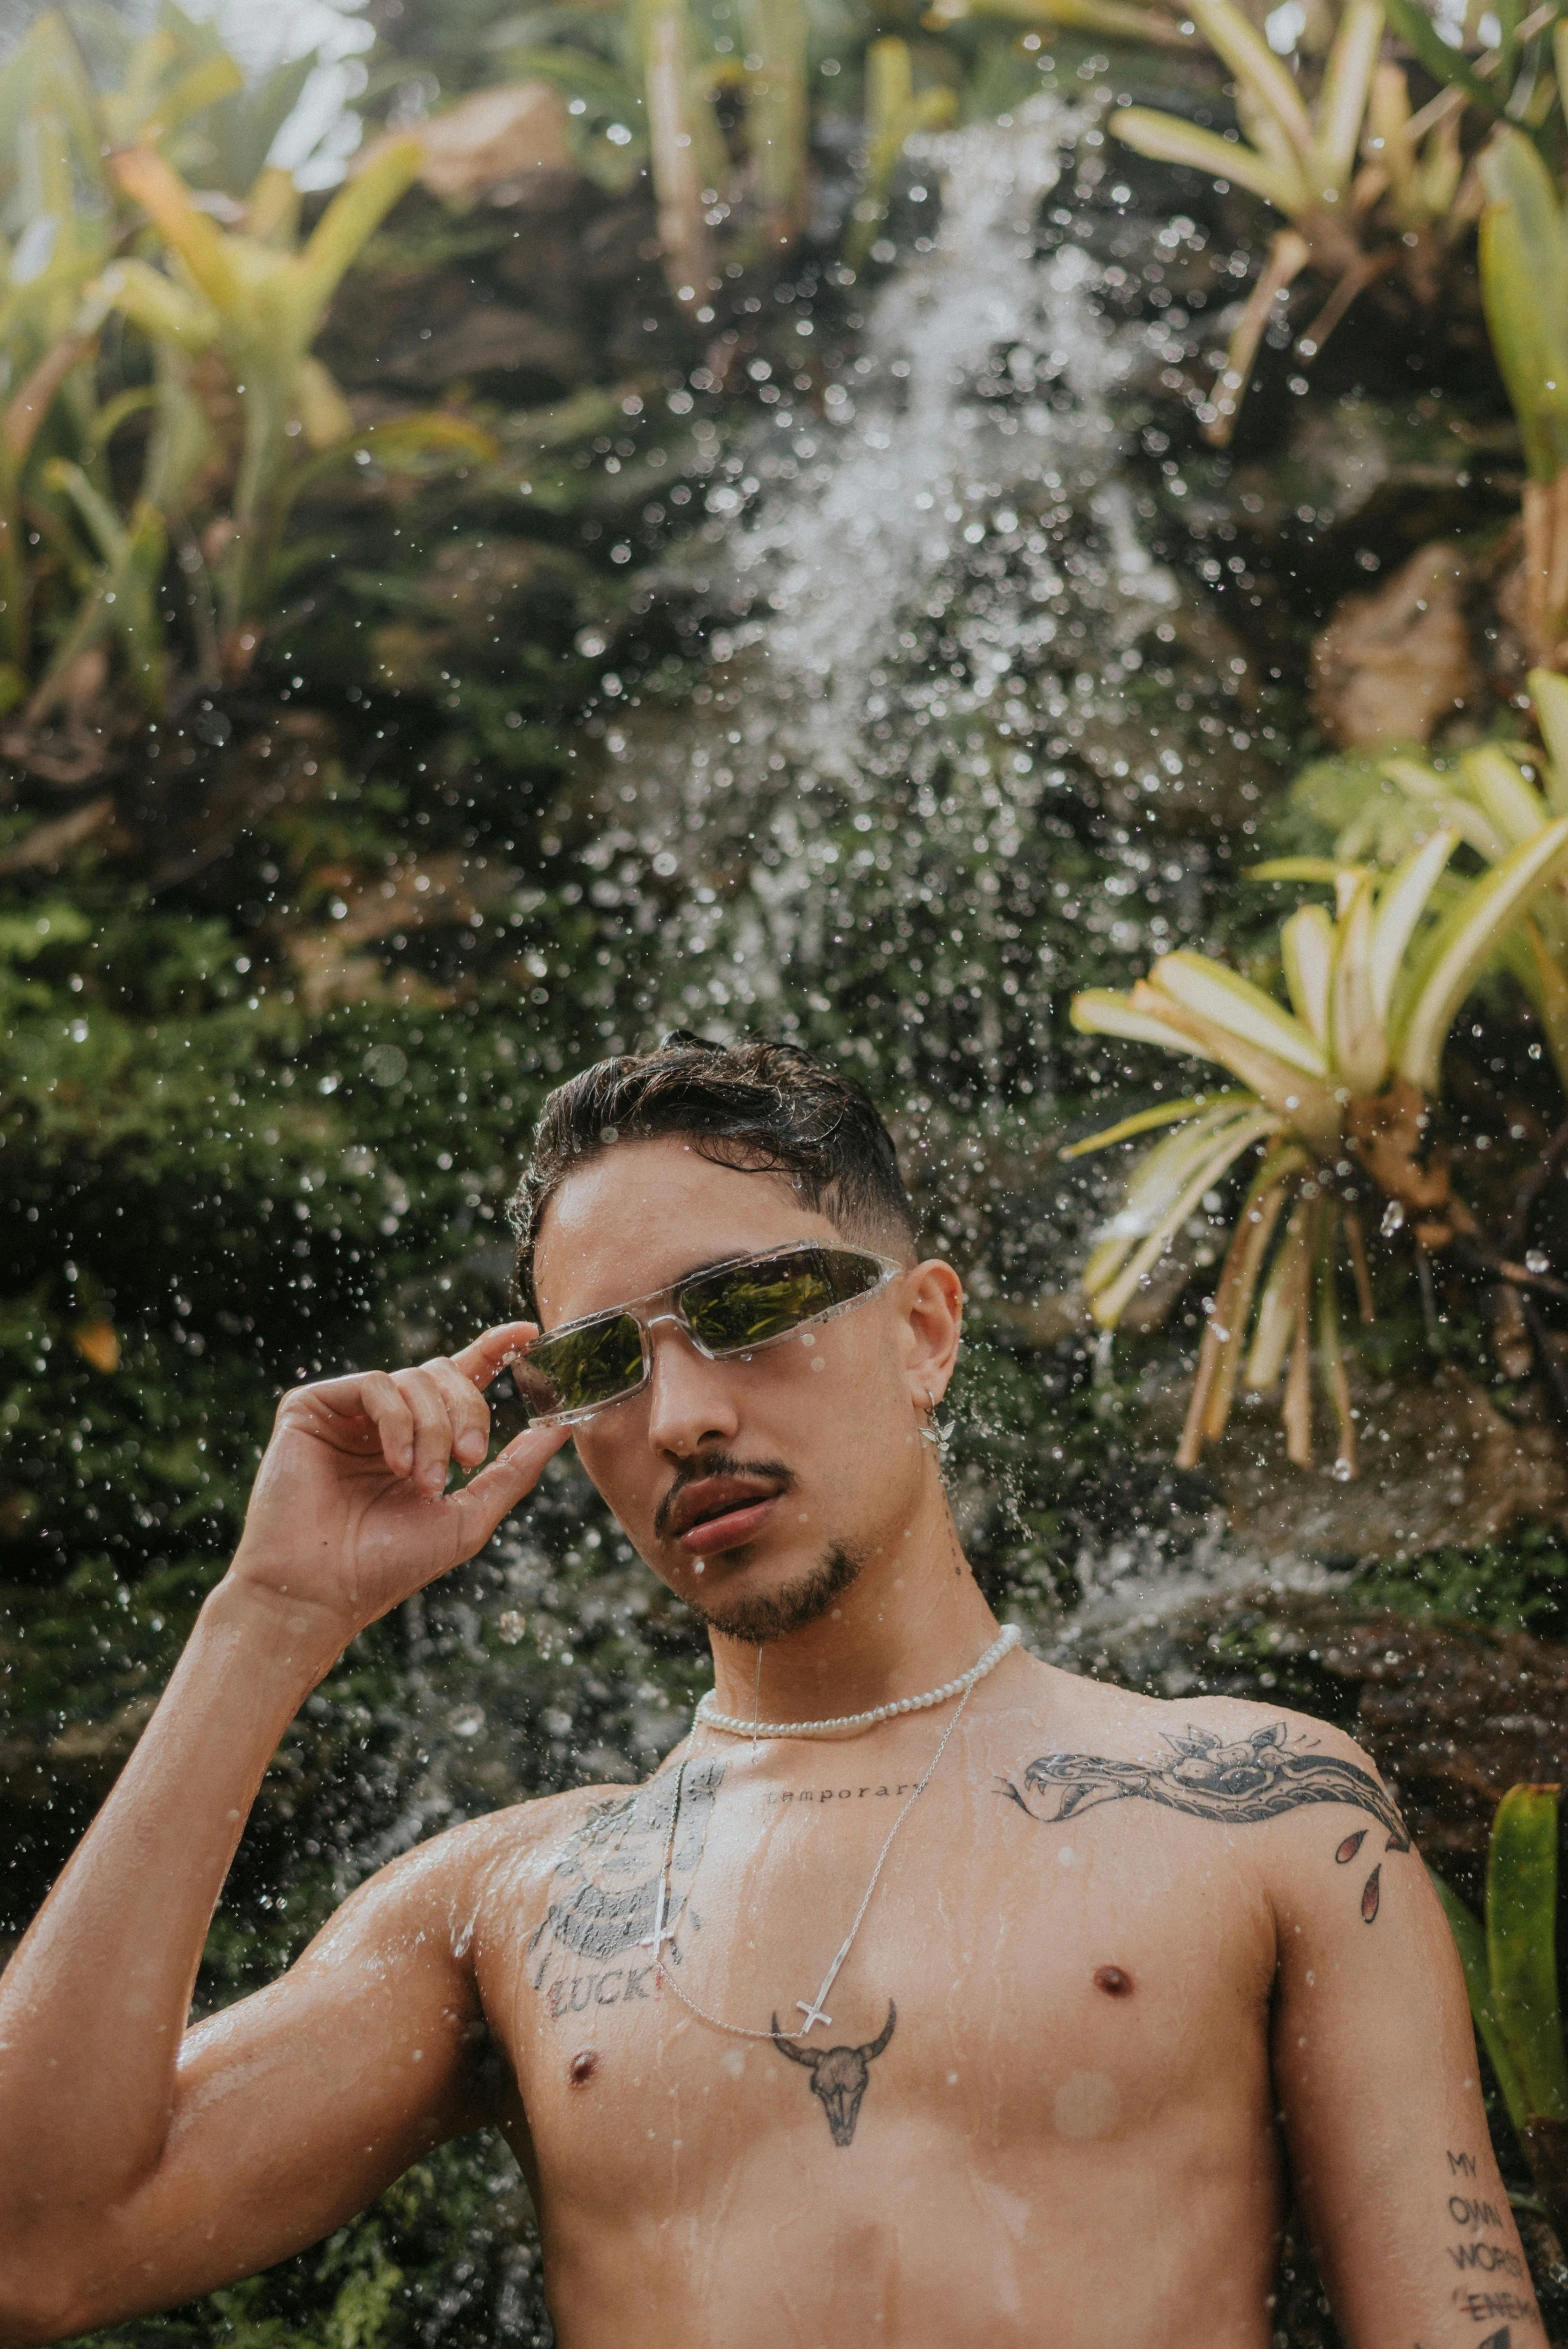 shirtless young man in shades with sunglasses and a waterfall